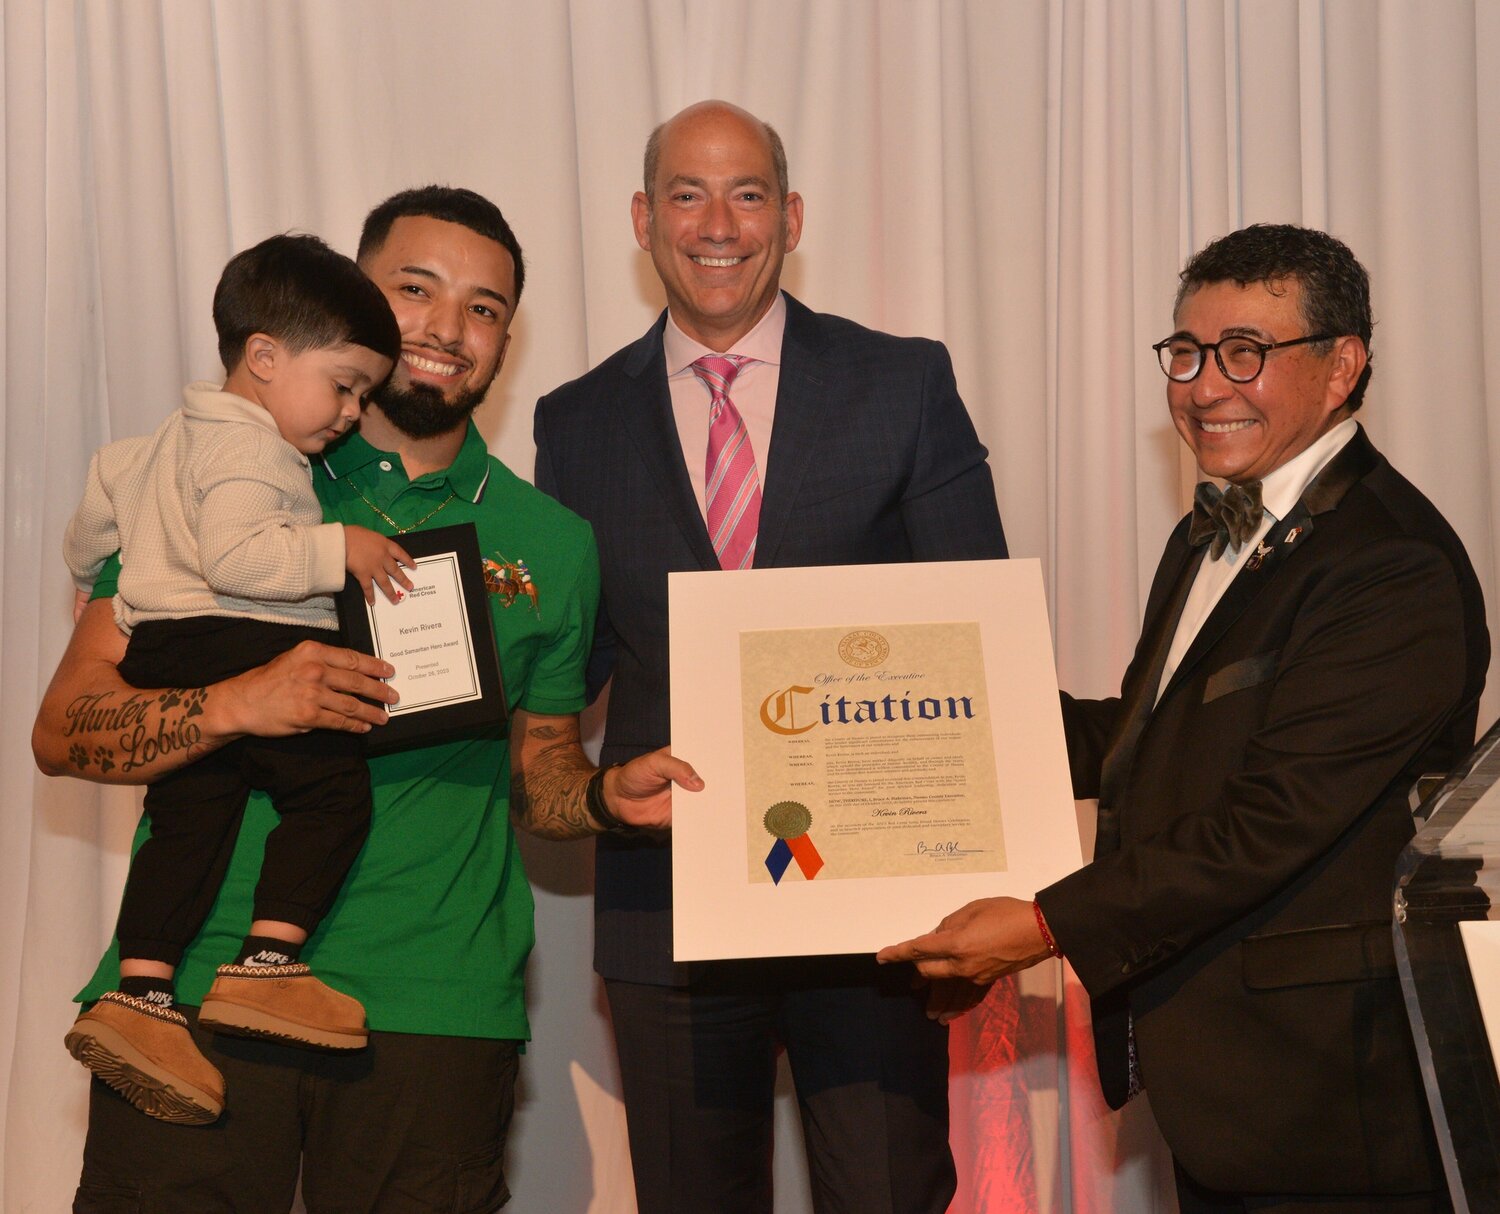 Kevin Rivera, formerly of Uniondale, saved seven members of a family from a house fire in Syosset on Sept. 10, 2022. His 1-year-old son, Kayden, grabbed his father’s Good Samaritan award at the American Red Cross ceremony on Oct. 26, while award presenter Barry Litwin, CEO of Global Industrial, looked on. Jose Dominguez, CEO of the American Red Cross on Long Island, presented Rivera with a citation sent by U.S. Rep. Anthony D’Esposito.